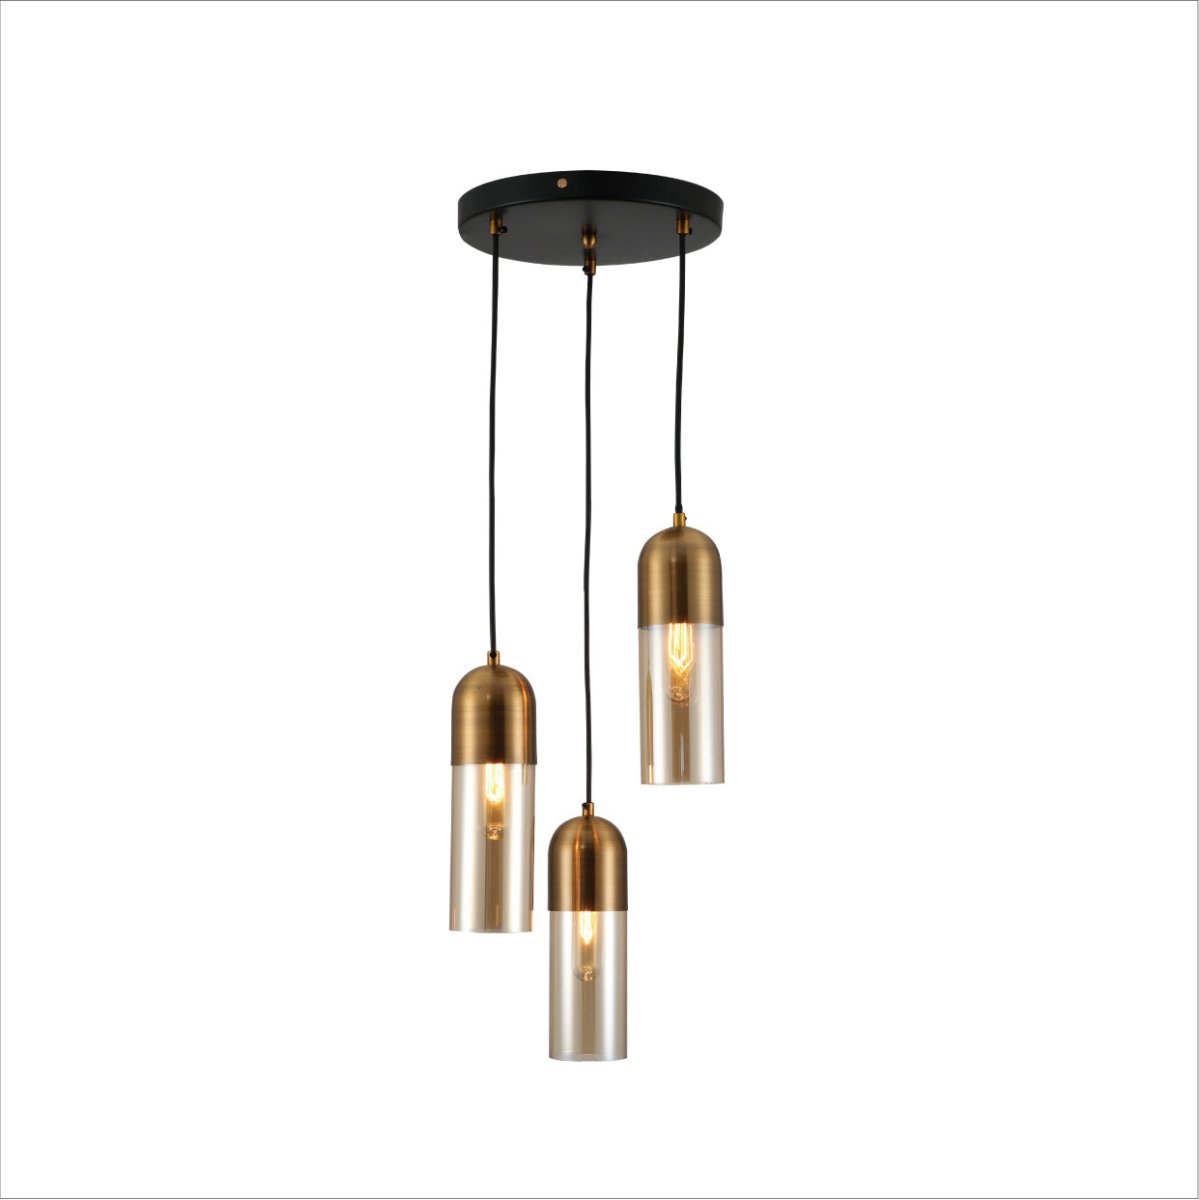 Main image of Amber Glass Gold Aluminium Bronze Plated Top Cylinder Pendant Light with 3xE27 Fitting | TEKLED 159-17299